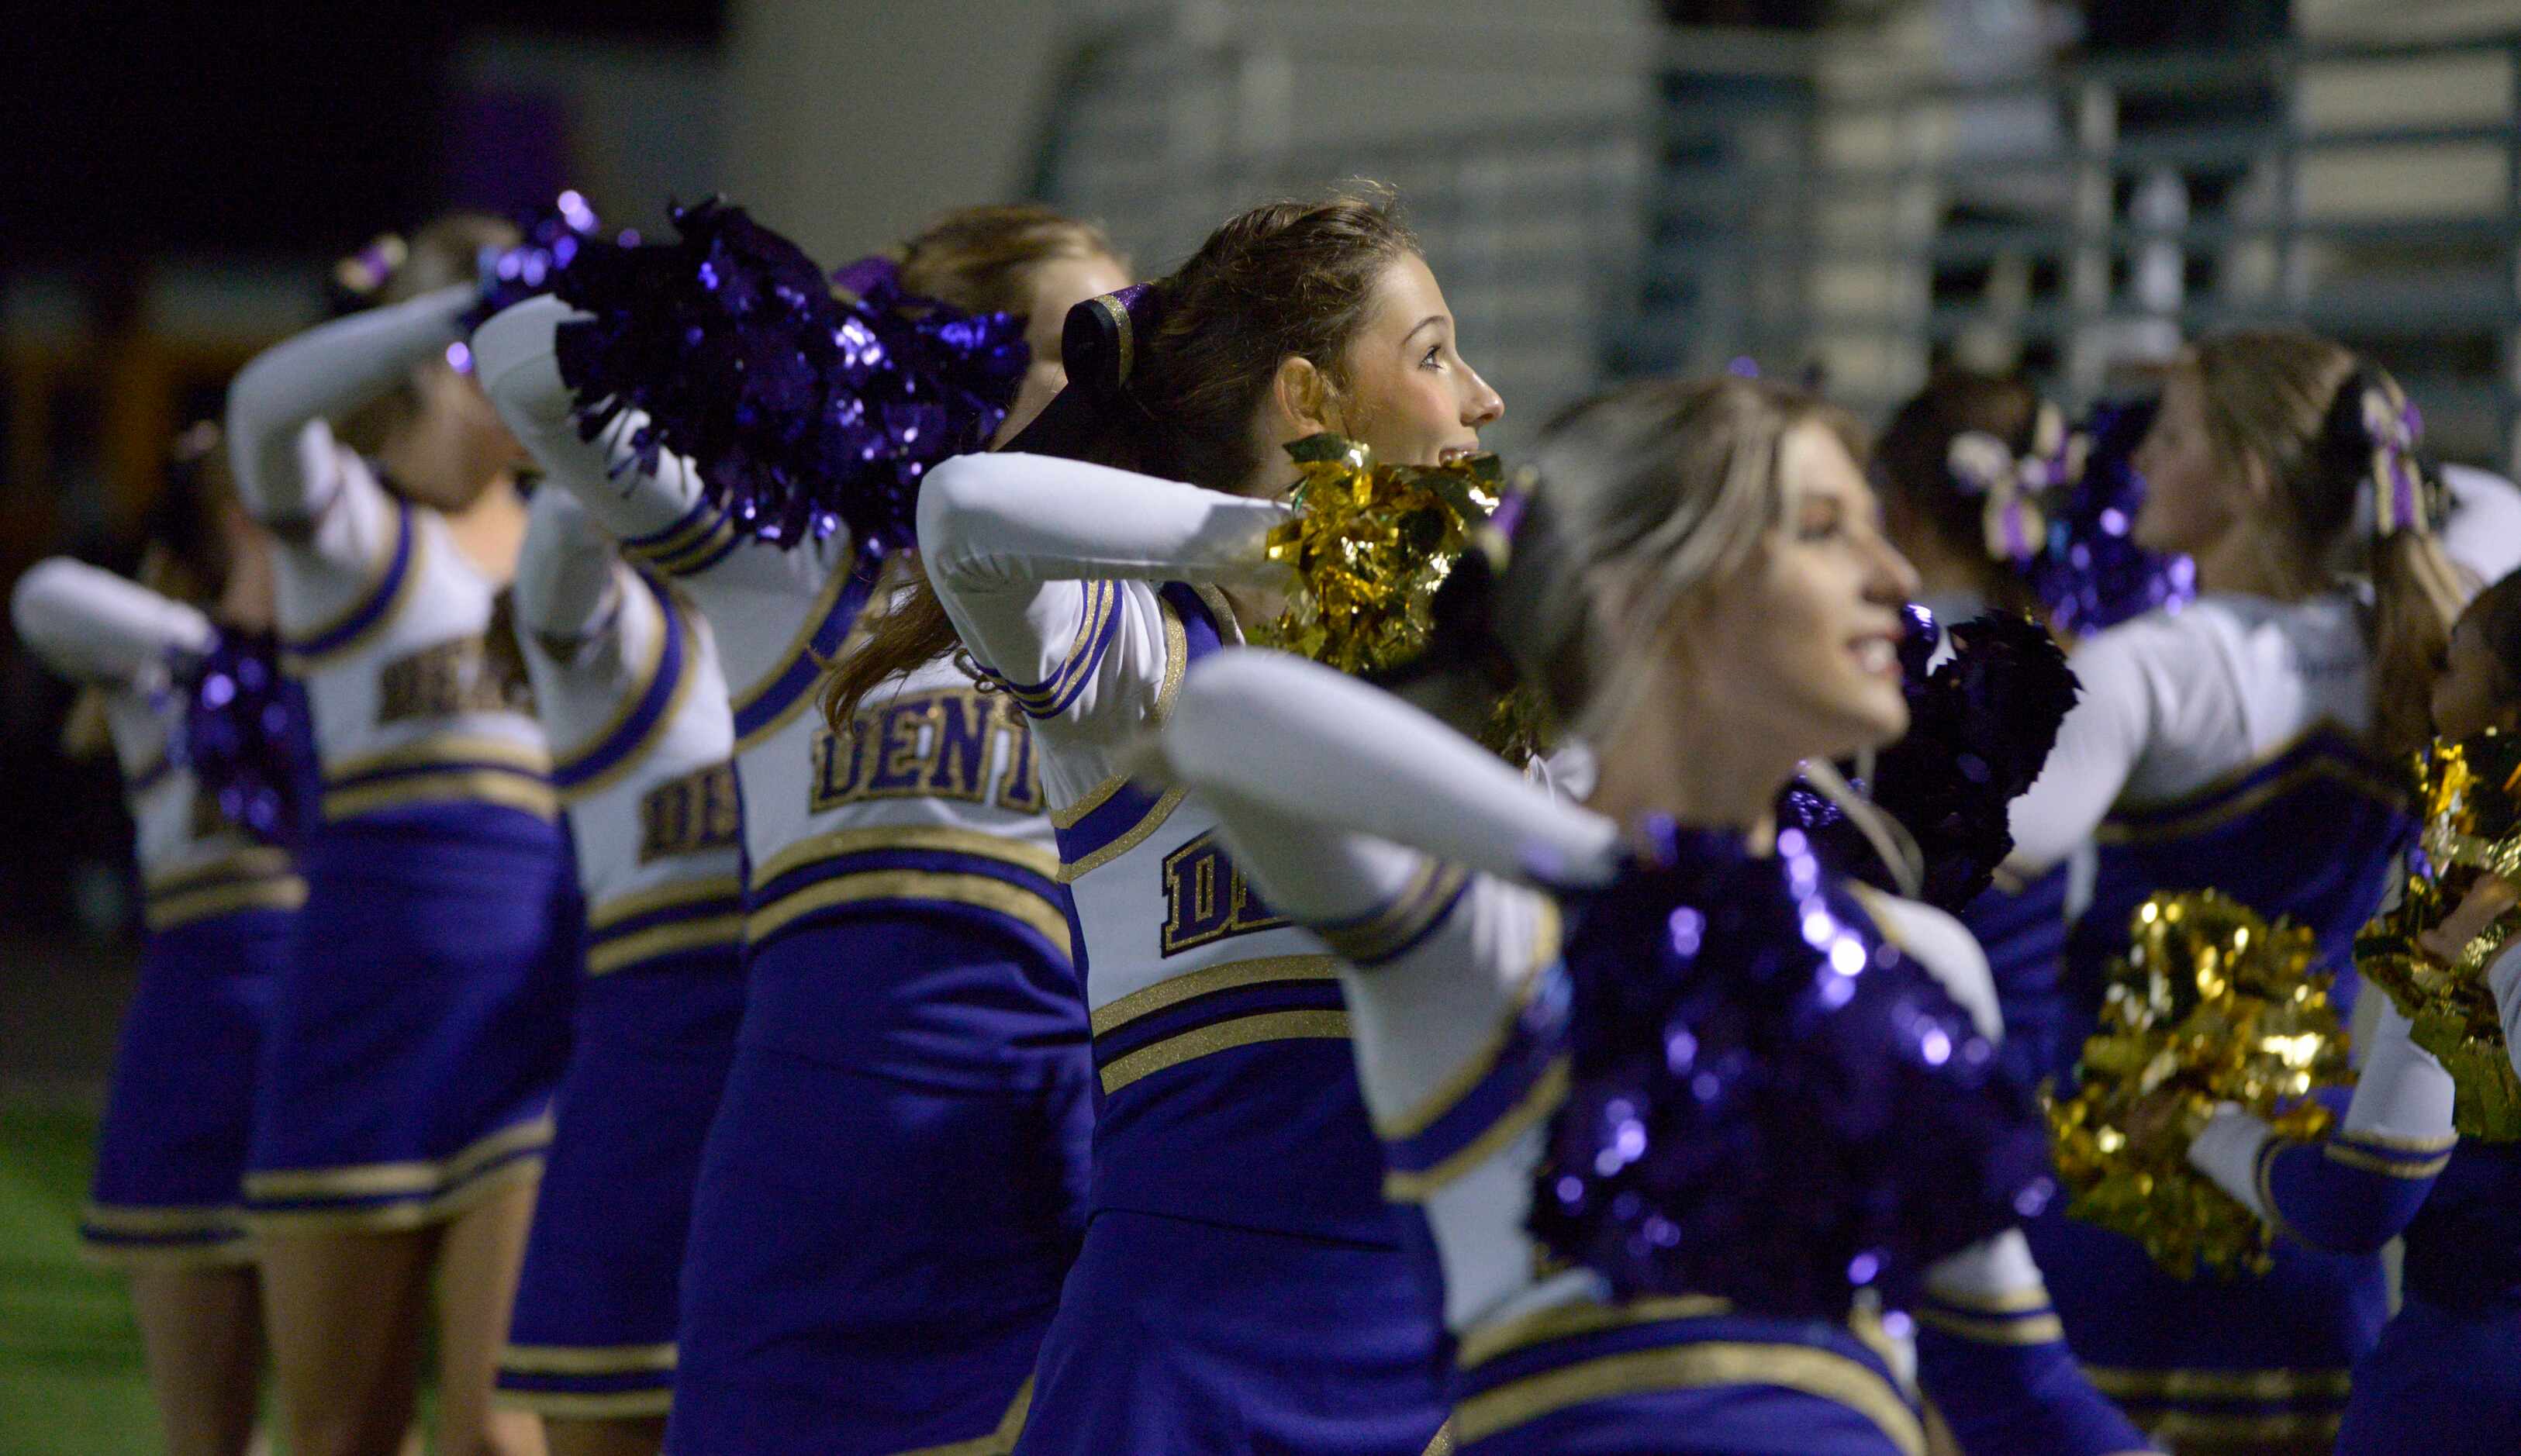 Denton cheerleaders perform in the first quarter of a high school football game between...